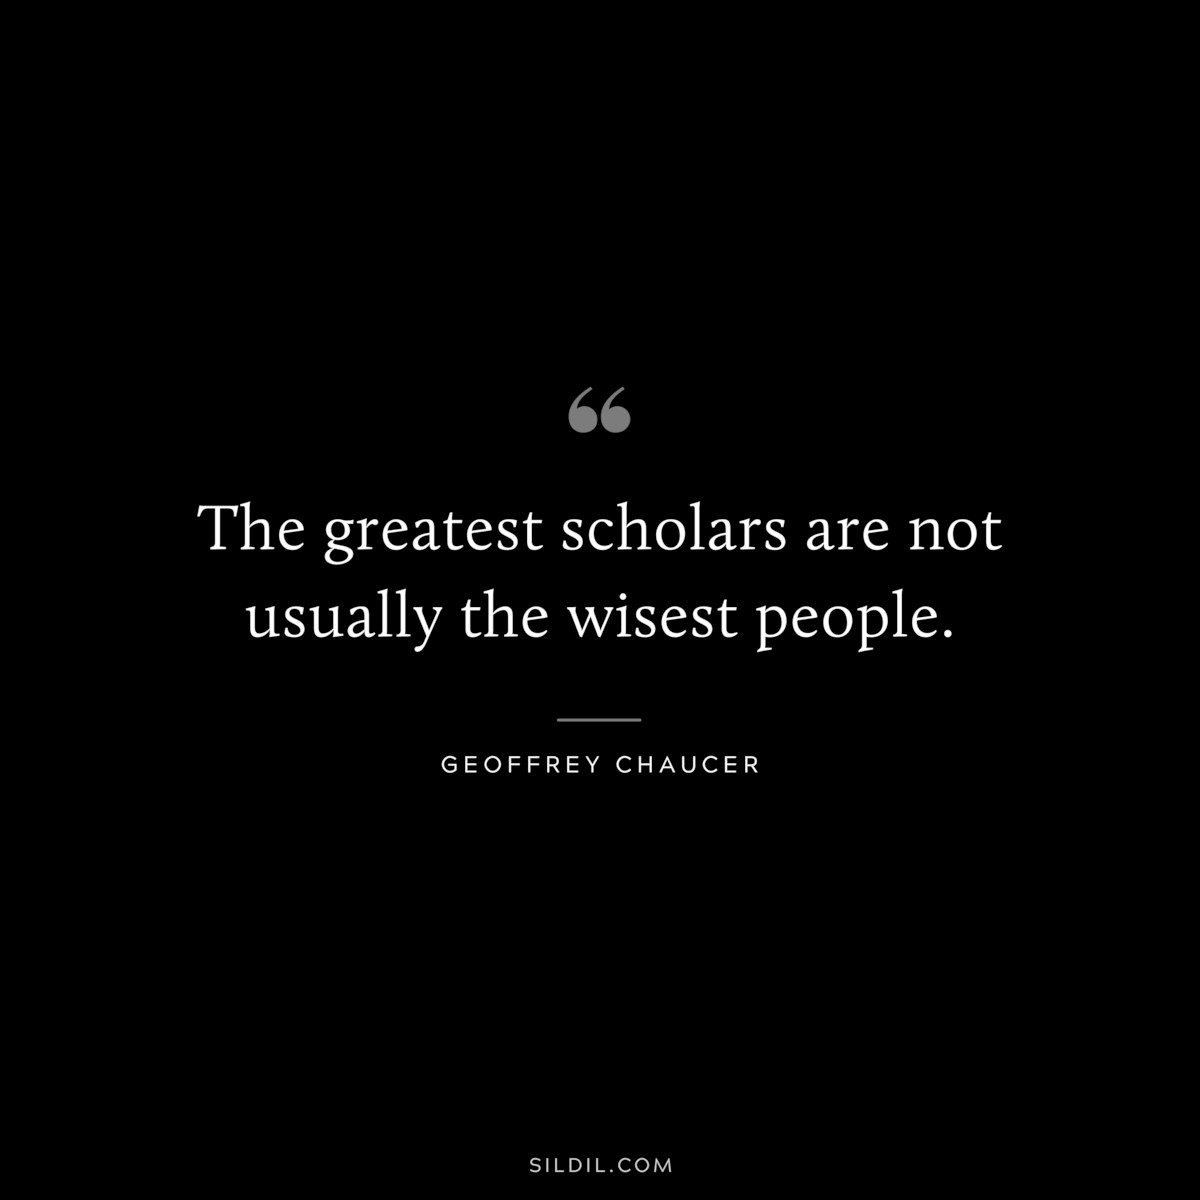 The greatest scholars are not usually the wisest people. ― Geoffrey Chaucer